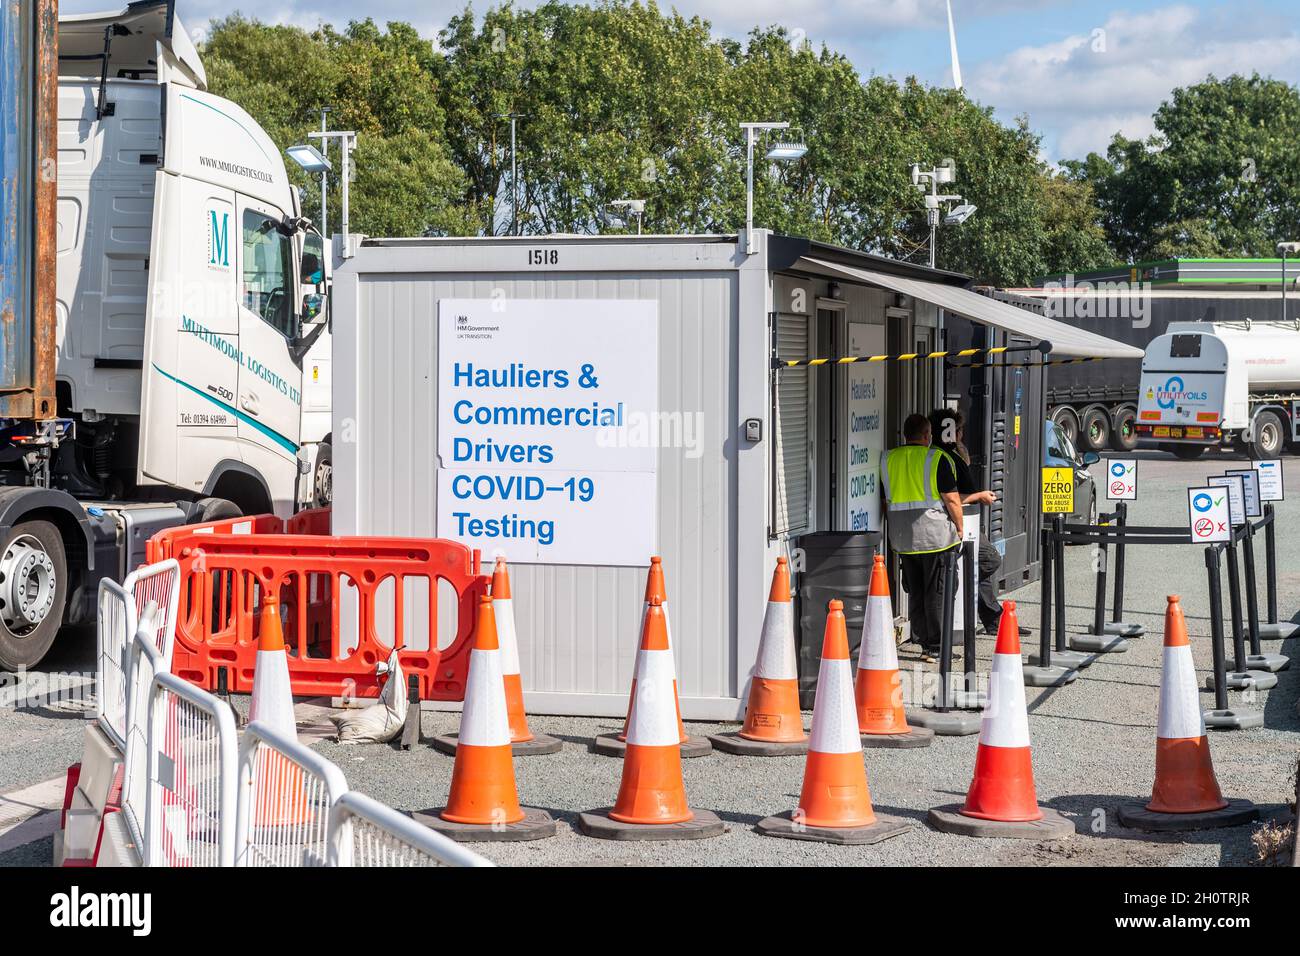 COVID-19 testing centre for commercial drivers at Burtonwood station on the M62 motorway in the UK. Stock Photo